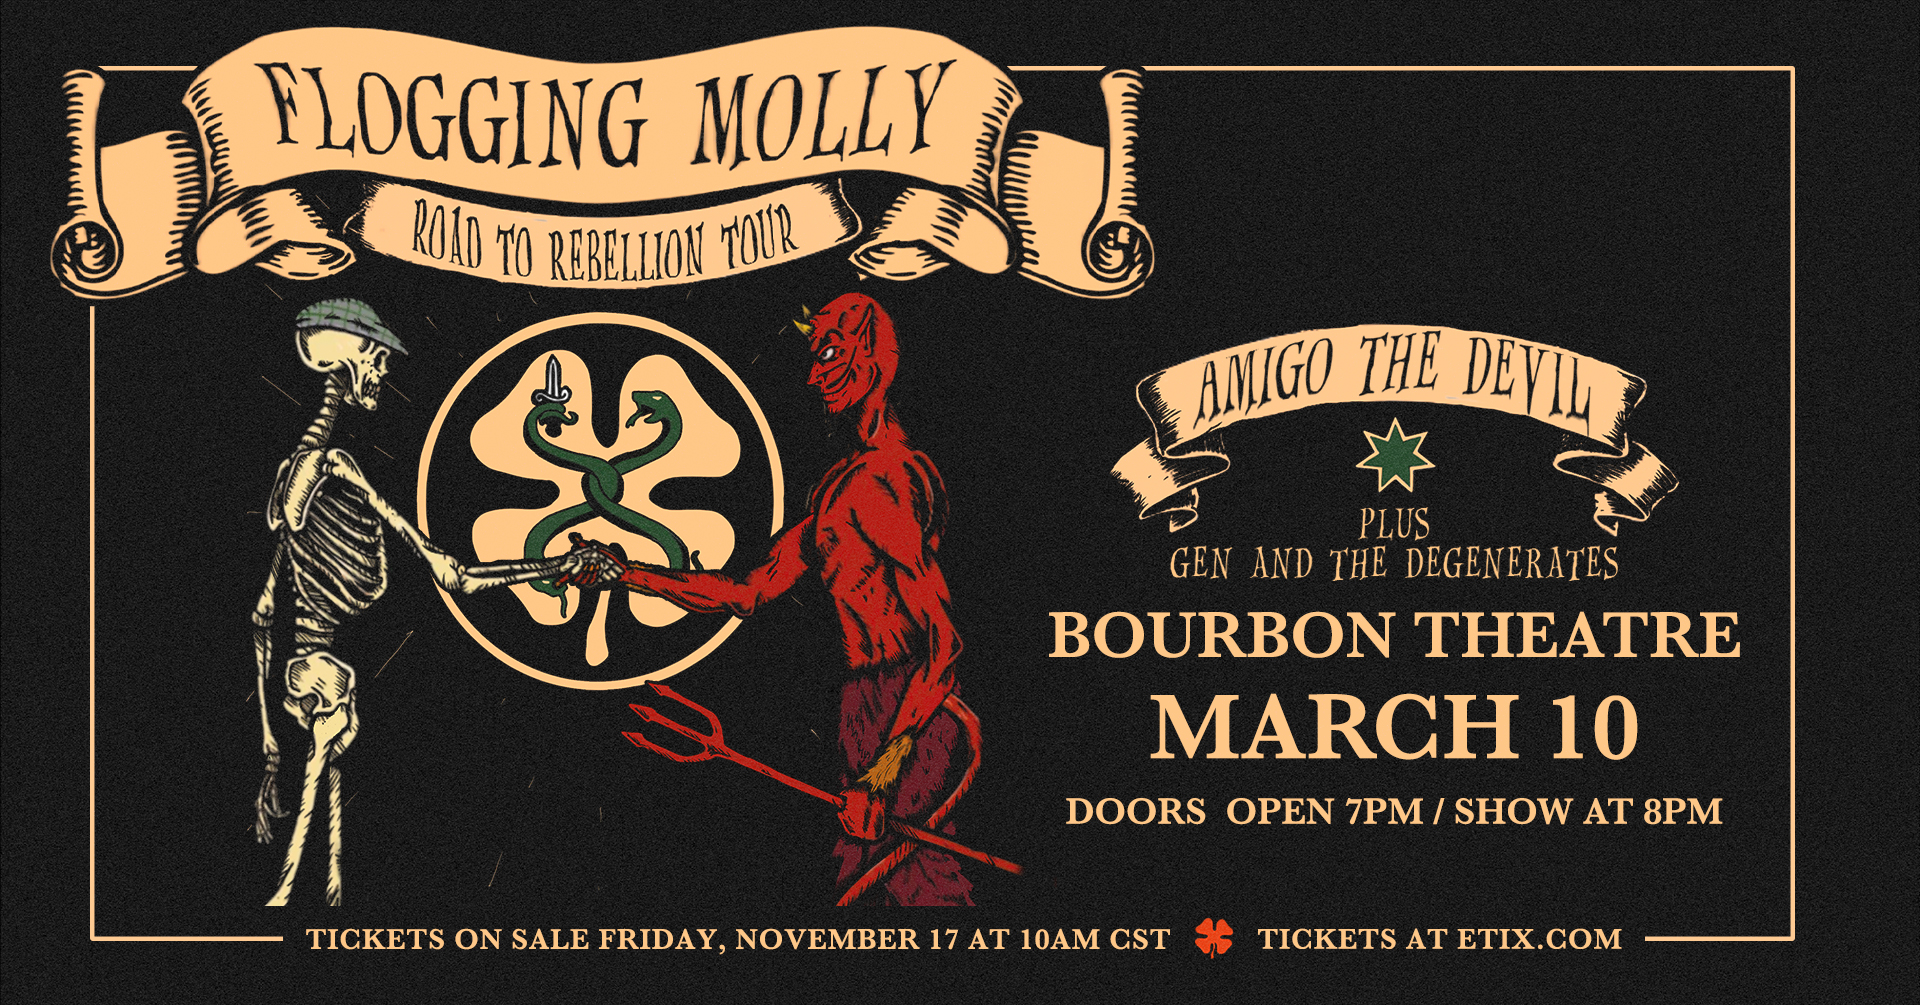 <h1 class="tribe-events-single-event-title">FLOGGING MOLLY</h1>